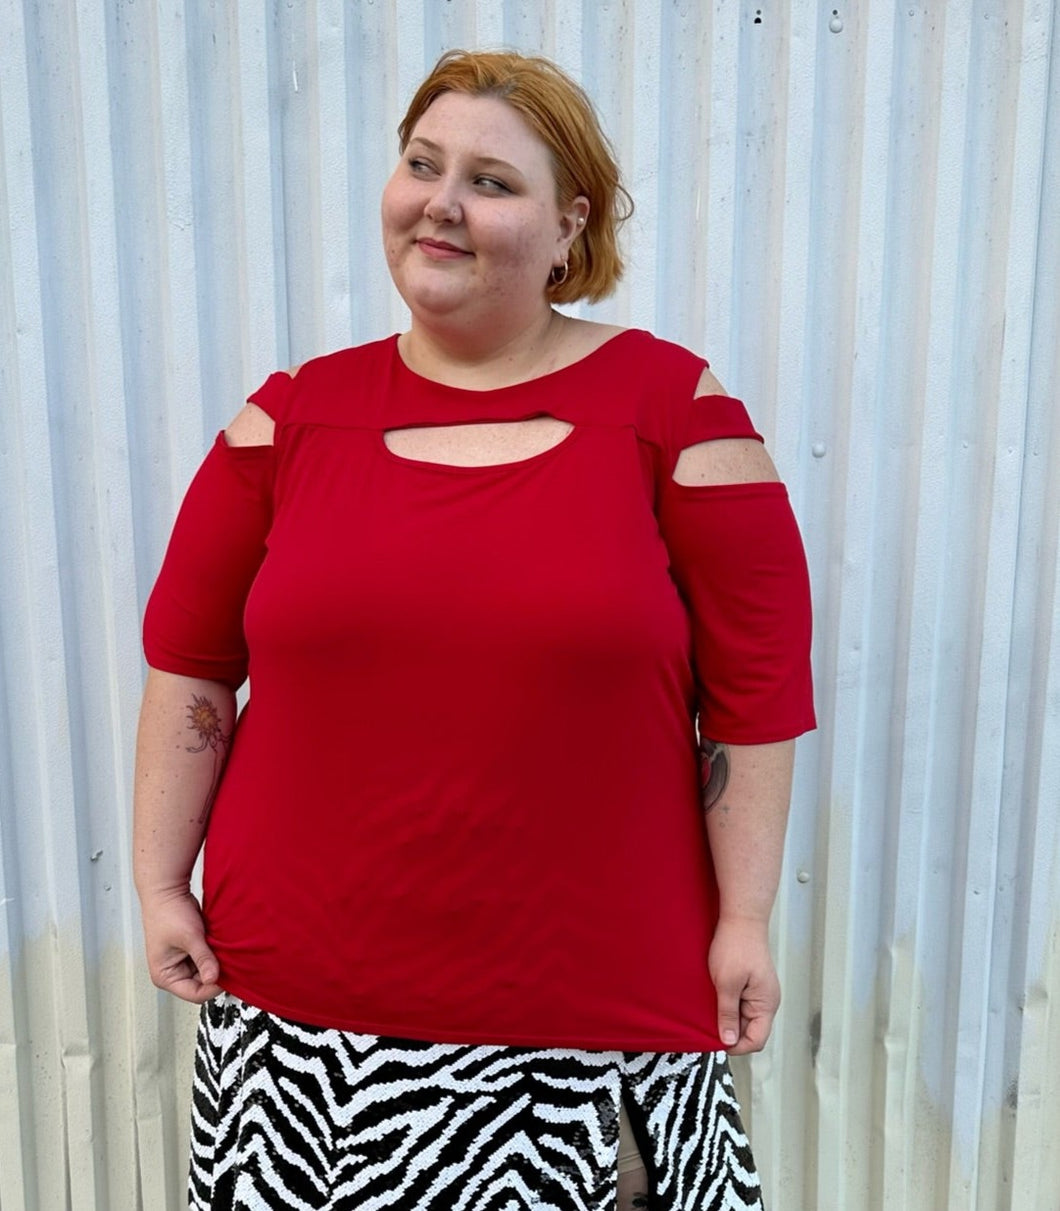 Front view of a size 30/32 Ashley Stewart red cut-out blouse with shoulder, sleeve, and bust cut-outs on a size 22/24 model. The photo is taken outside in natural lighting.